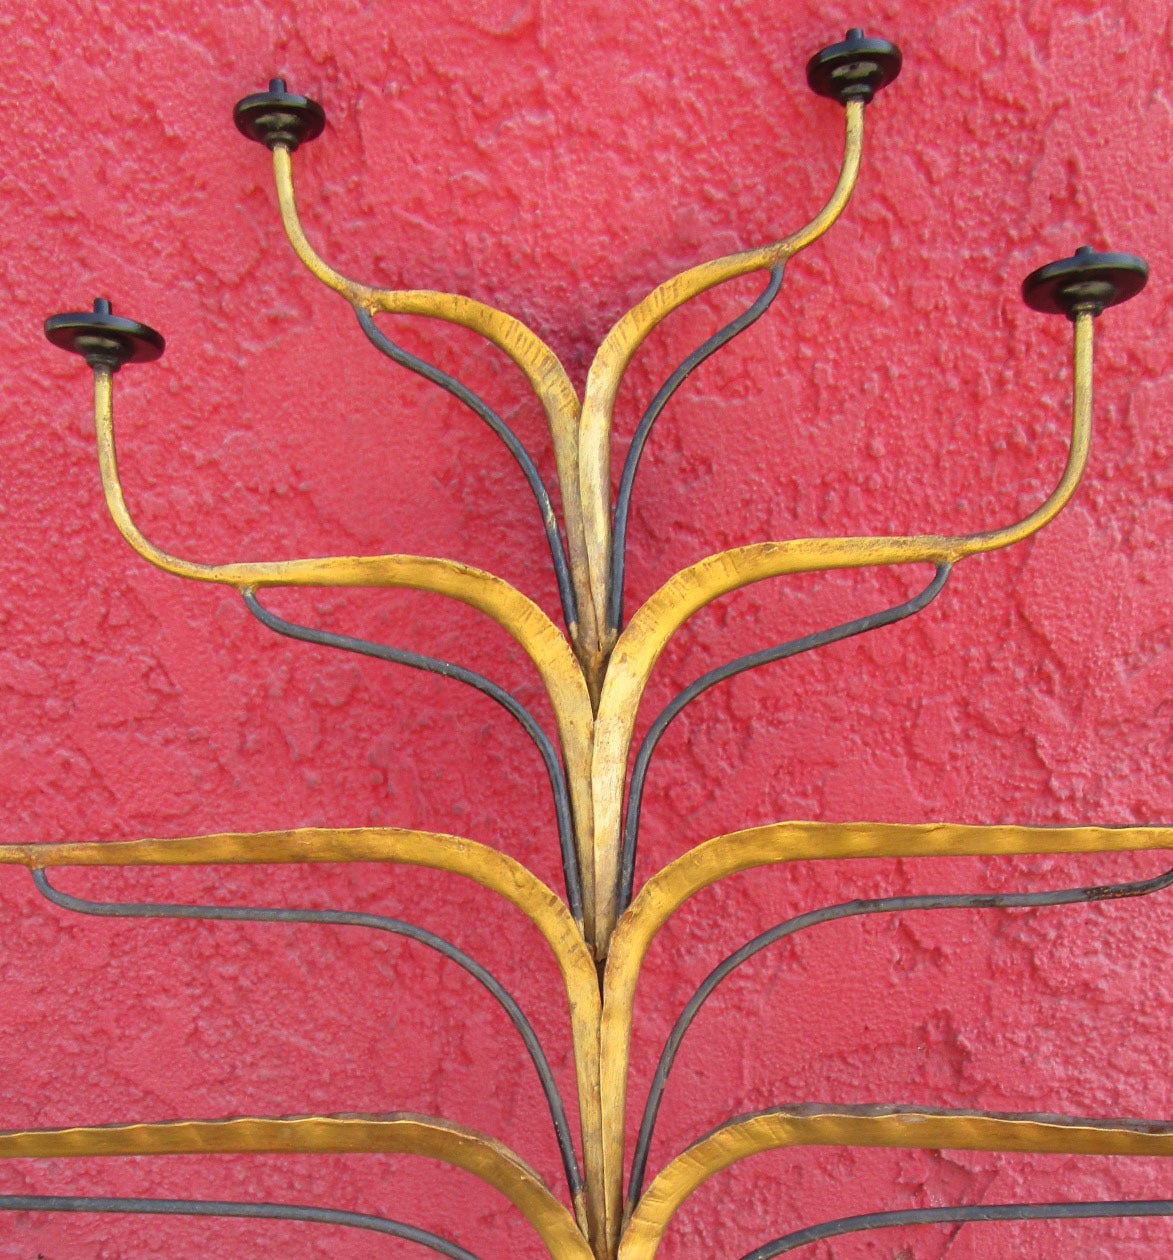 20th Century Gilt Candelabra Sconce with Ten Candle Arms